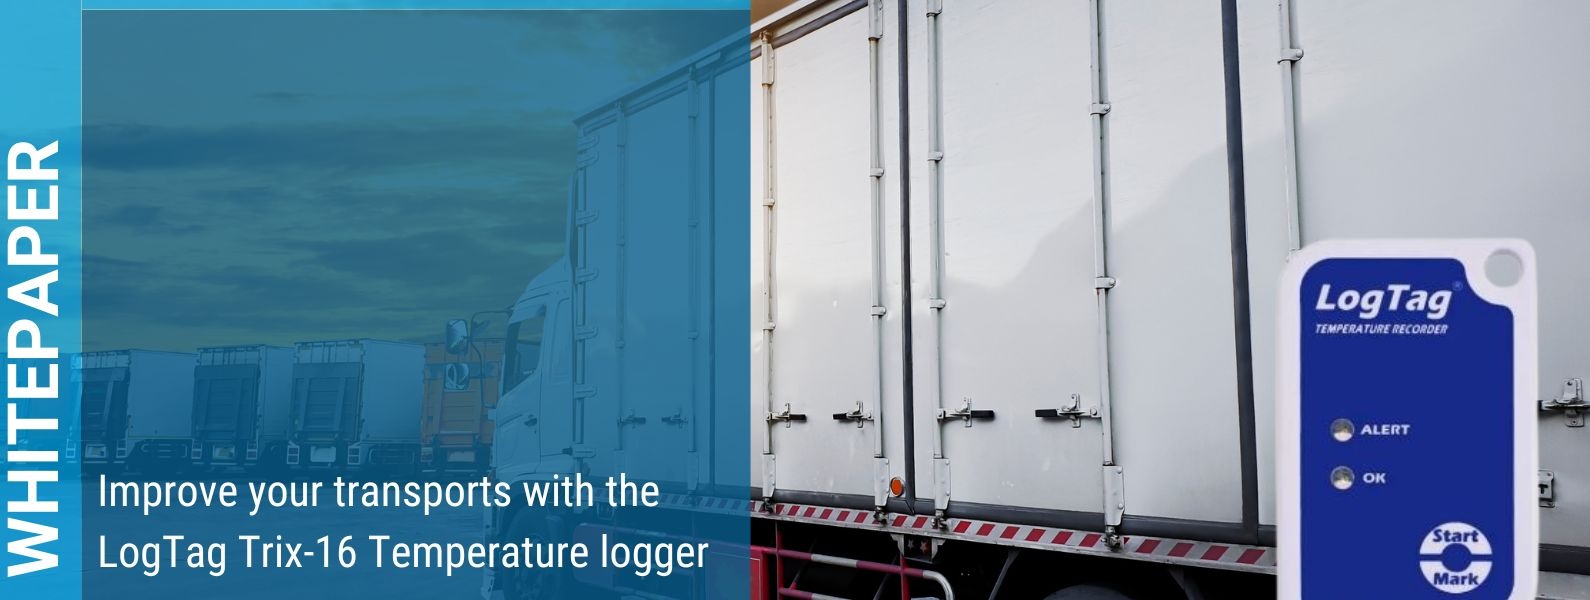 Improve your transports with the LogTag Trix-16 Temperature logger